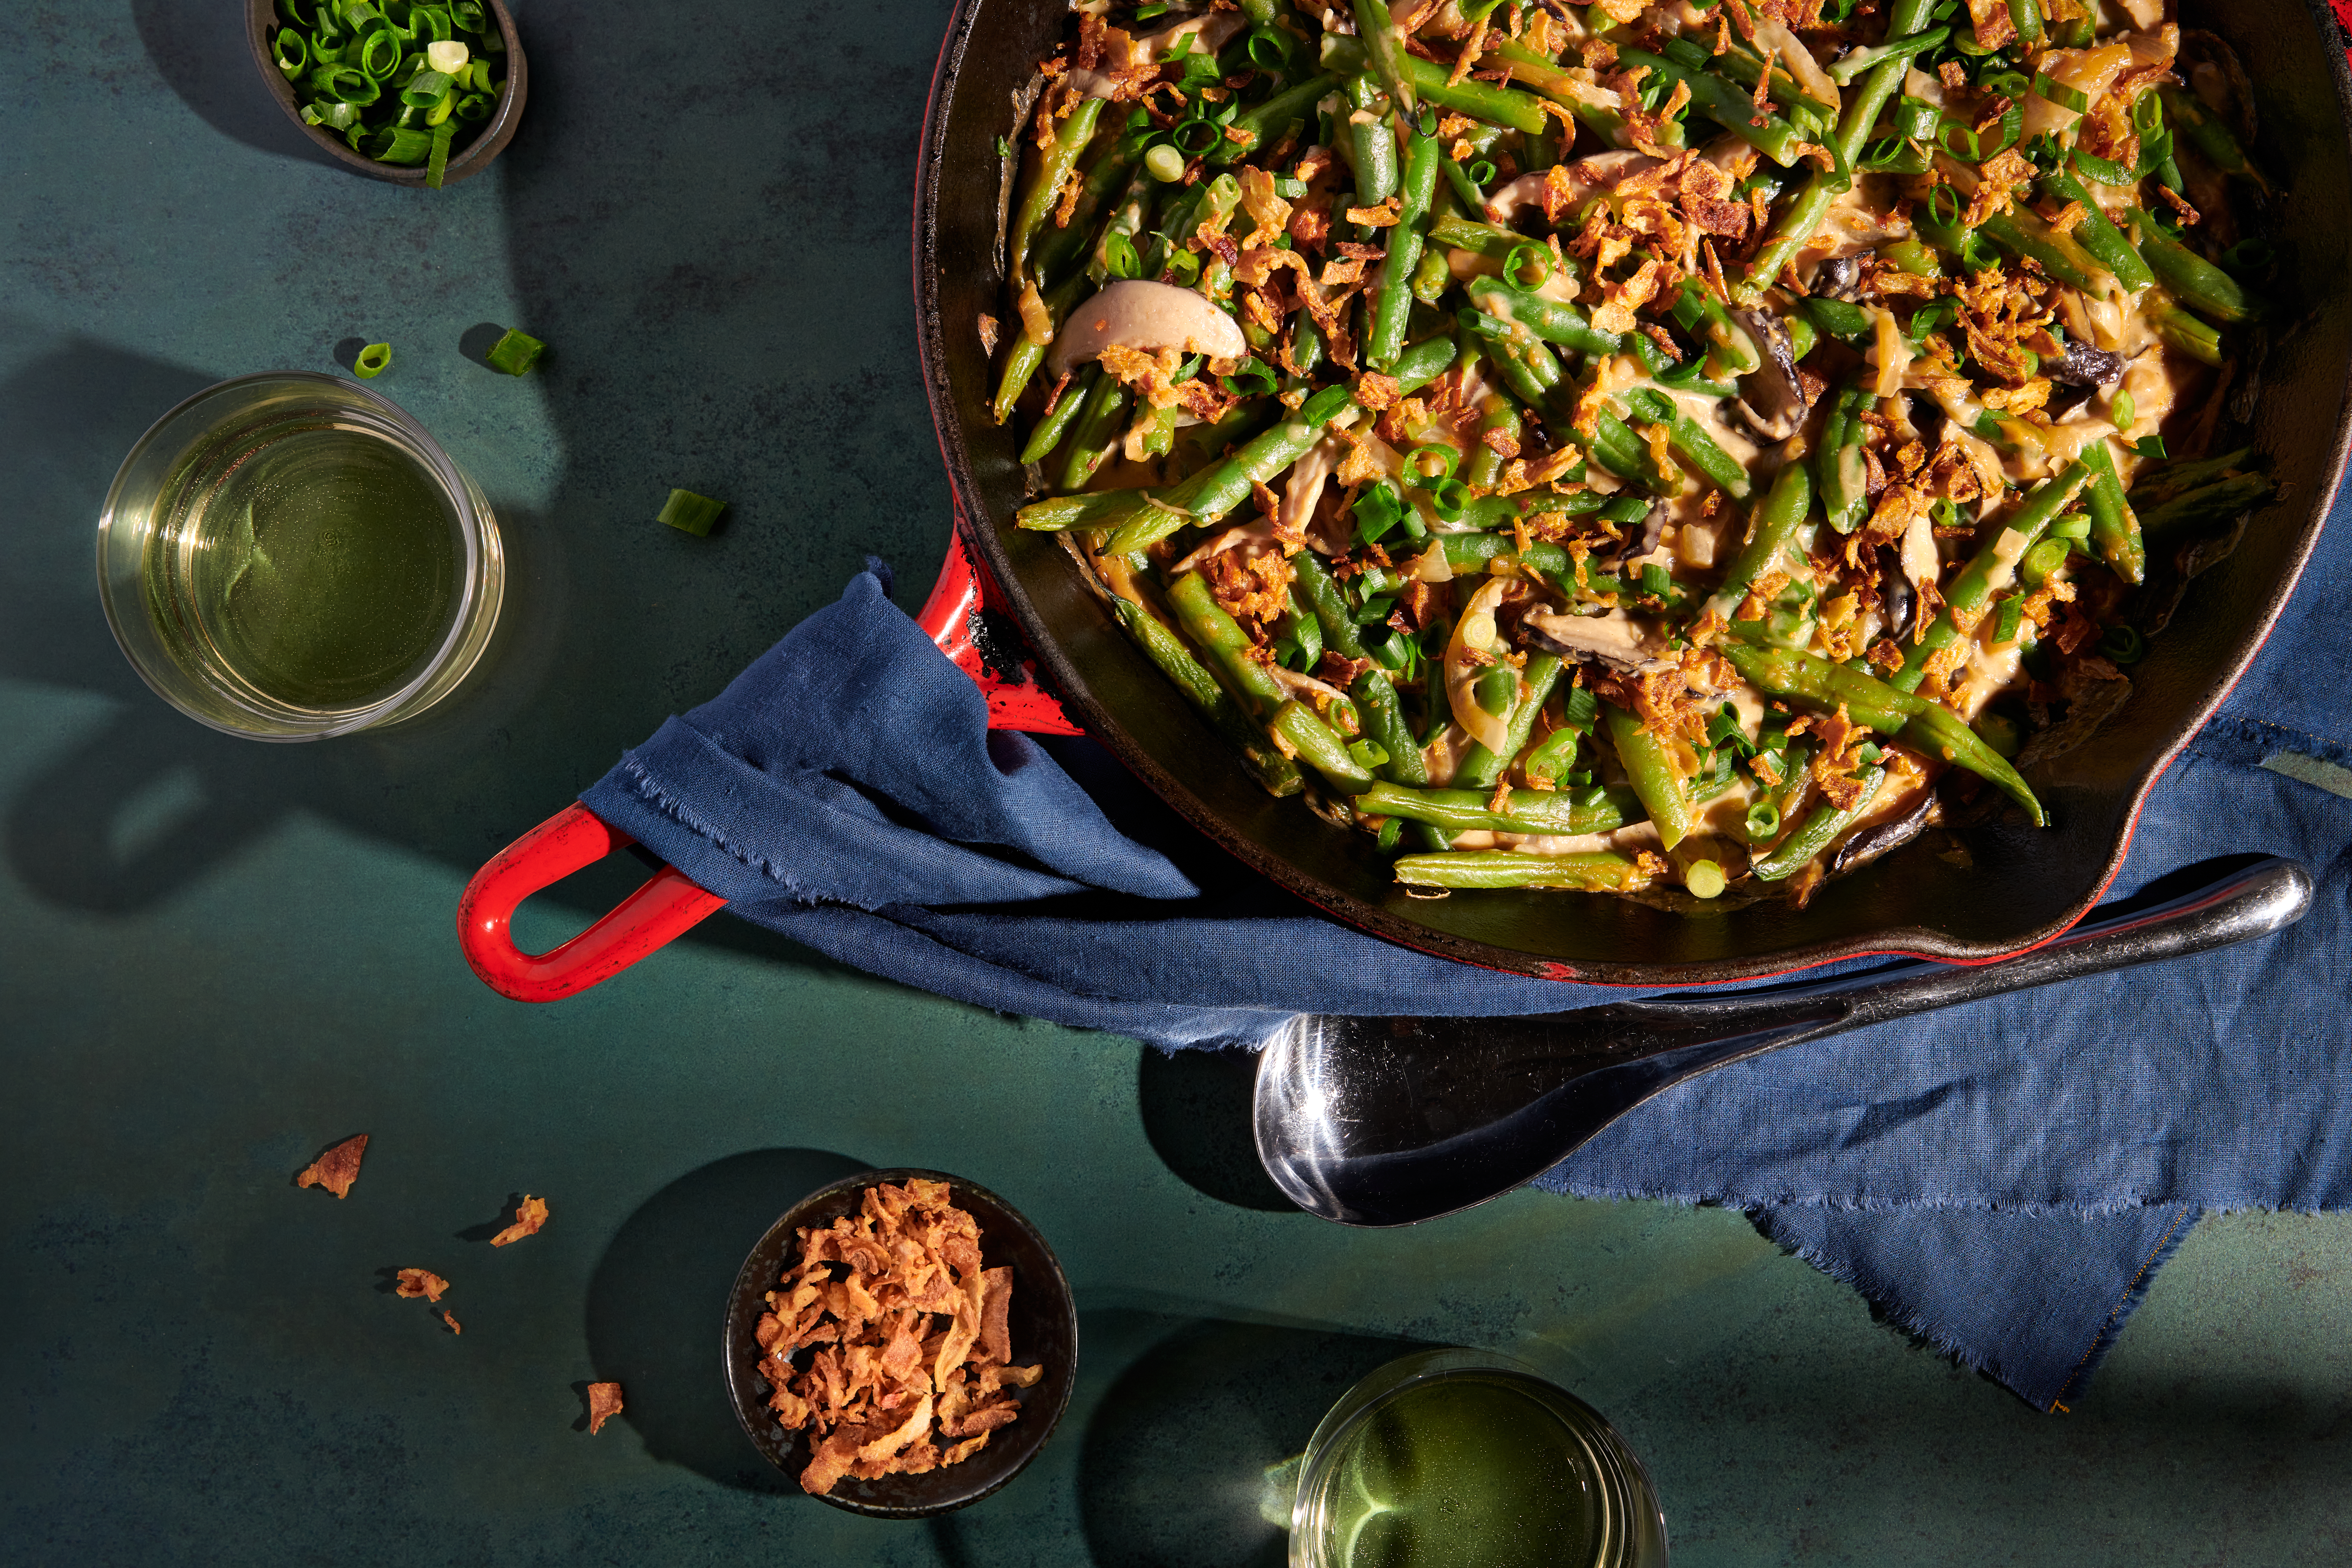 Green bean casserole in a red castiron skillet. Next to the skillet are two drinking glasses, small bowls of sliced scallions and fried shallots. A blue napkin is draped over the skillet handle.